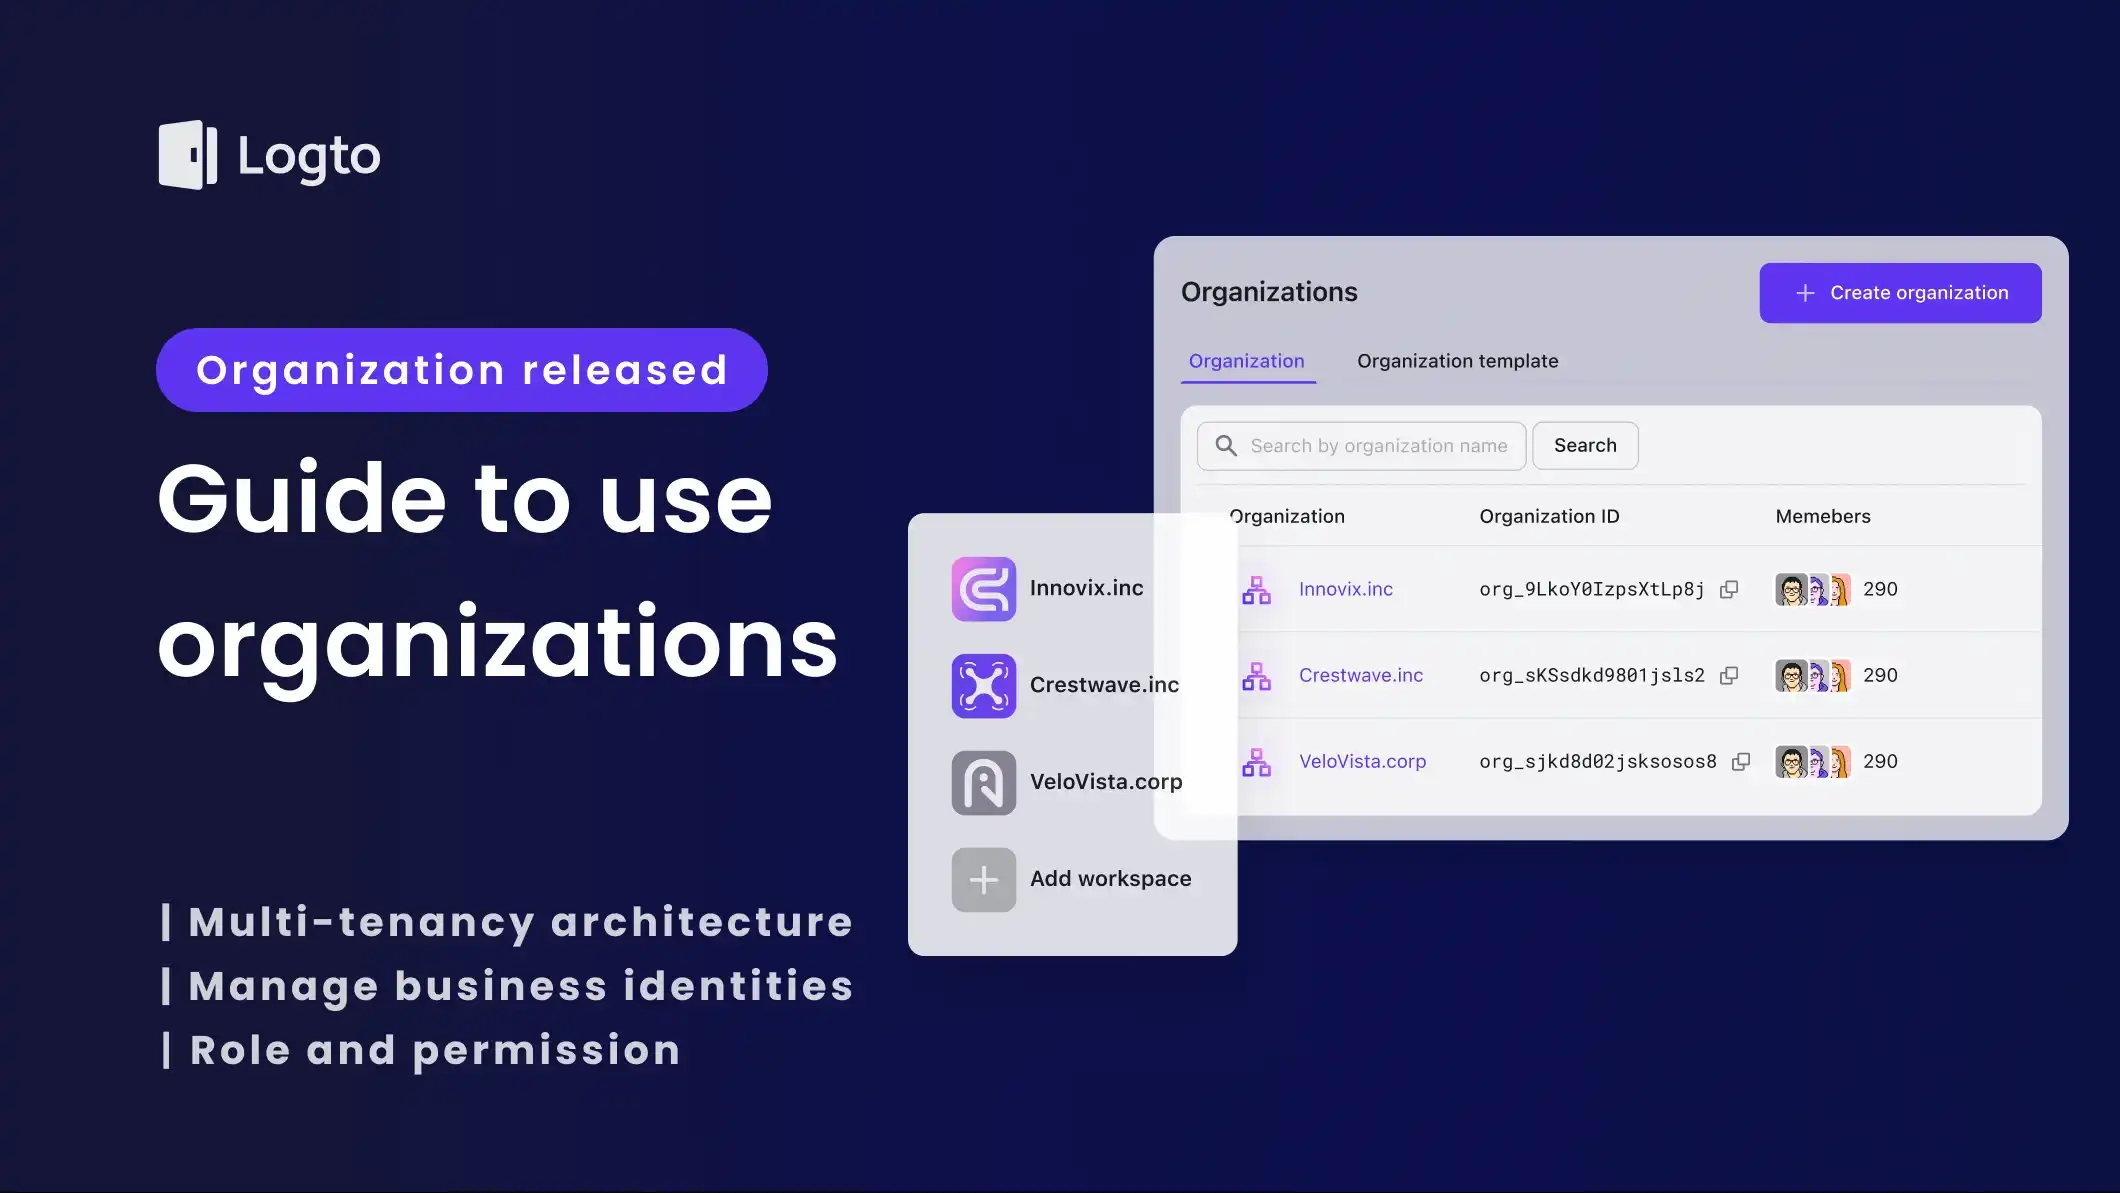 An easy guide to begin with Logto organizations - for building a multi-tenant app